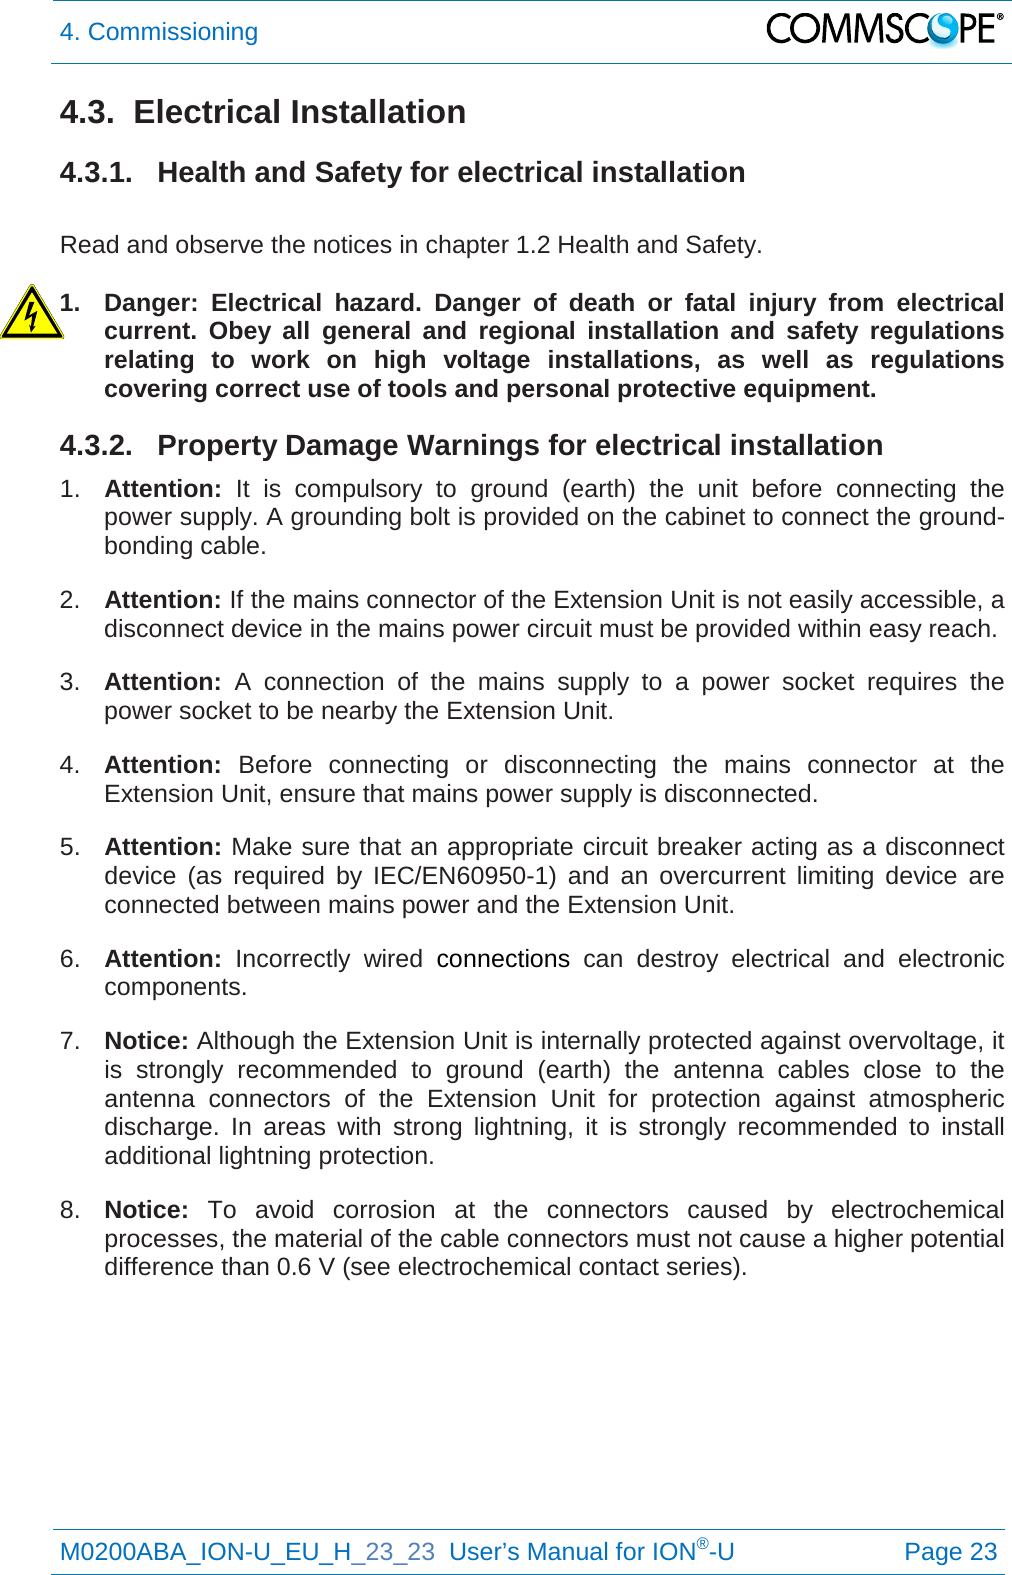 4. Commissioning   M0200ABA_ION-U_EU_H_23_23  User’s Manual for ION®-U  Page 23  4.3.  Electrical Installation 4.3.1. Health and Safety for electrical installation  Read and observe the notices in chapter 1.2 Health and Safety.  1. Danger: Electrical hazard. Danger of death or fatal injury from electrical current. Obey all general and regional installation and safety regulations relating to work on high voltage installations, as well as regulations covering correct use of tools and personal protective equipment. 4.3.2. Property Damage Warnings for electrical installation 1. Attention: It is compulsory to ground (earth) the unit before connecting the power supply. A grounding bolt is provided on the cabinet to connect the ground-bonding cable. 2. Attention: If the mains connector of the Extension Unit is not easily accessible, a disconnect device in the mains power circuit must be provided within easy reach. 3. Attention: A connection of the mains supply to a power socket requires the power socket to be nearby the Extension Unit. 4. Attention:  Before connecting or disconnecting the mains connector at the Extension Unit, ensure that mains power supply is disconnected. 5. Attention: Make sure that an appropriate circuit breaker acting as a disconnect device (as required by IEC/EN60950-1) and an overcurrent limiting device are connected between mains power and the Extension Unit. 6. Attention: Incorrectly wired connections can destroy electrical and electronic components. 7. Notice: Although the Extension Unit is internally protected against overvoltage, it is strongly recommended to ground (earth) the antenna cables close to the antenna connectors of the Extension  Unit for protection against atmospheric discharge. In areas with strong lightning, it is strongly recommended to install additional lightning protection. 8. Notice: To avoid corrosion at the connectors caused by electrochemical processes, the material of the cable connectors must not cause a higher potential difference than 0.6 V (see electrochemical contact series).    